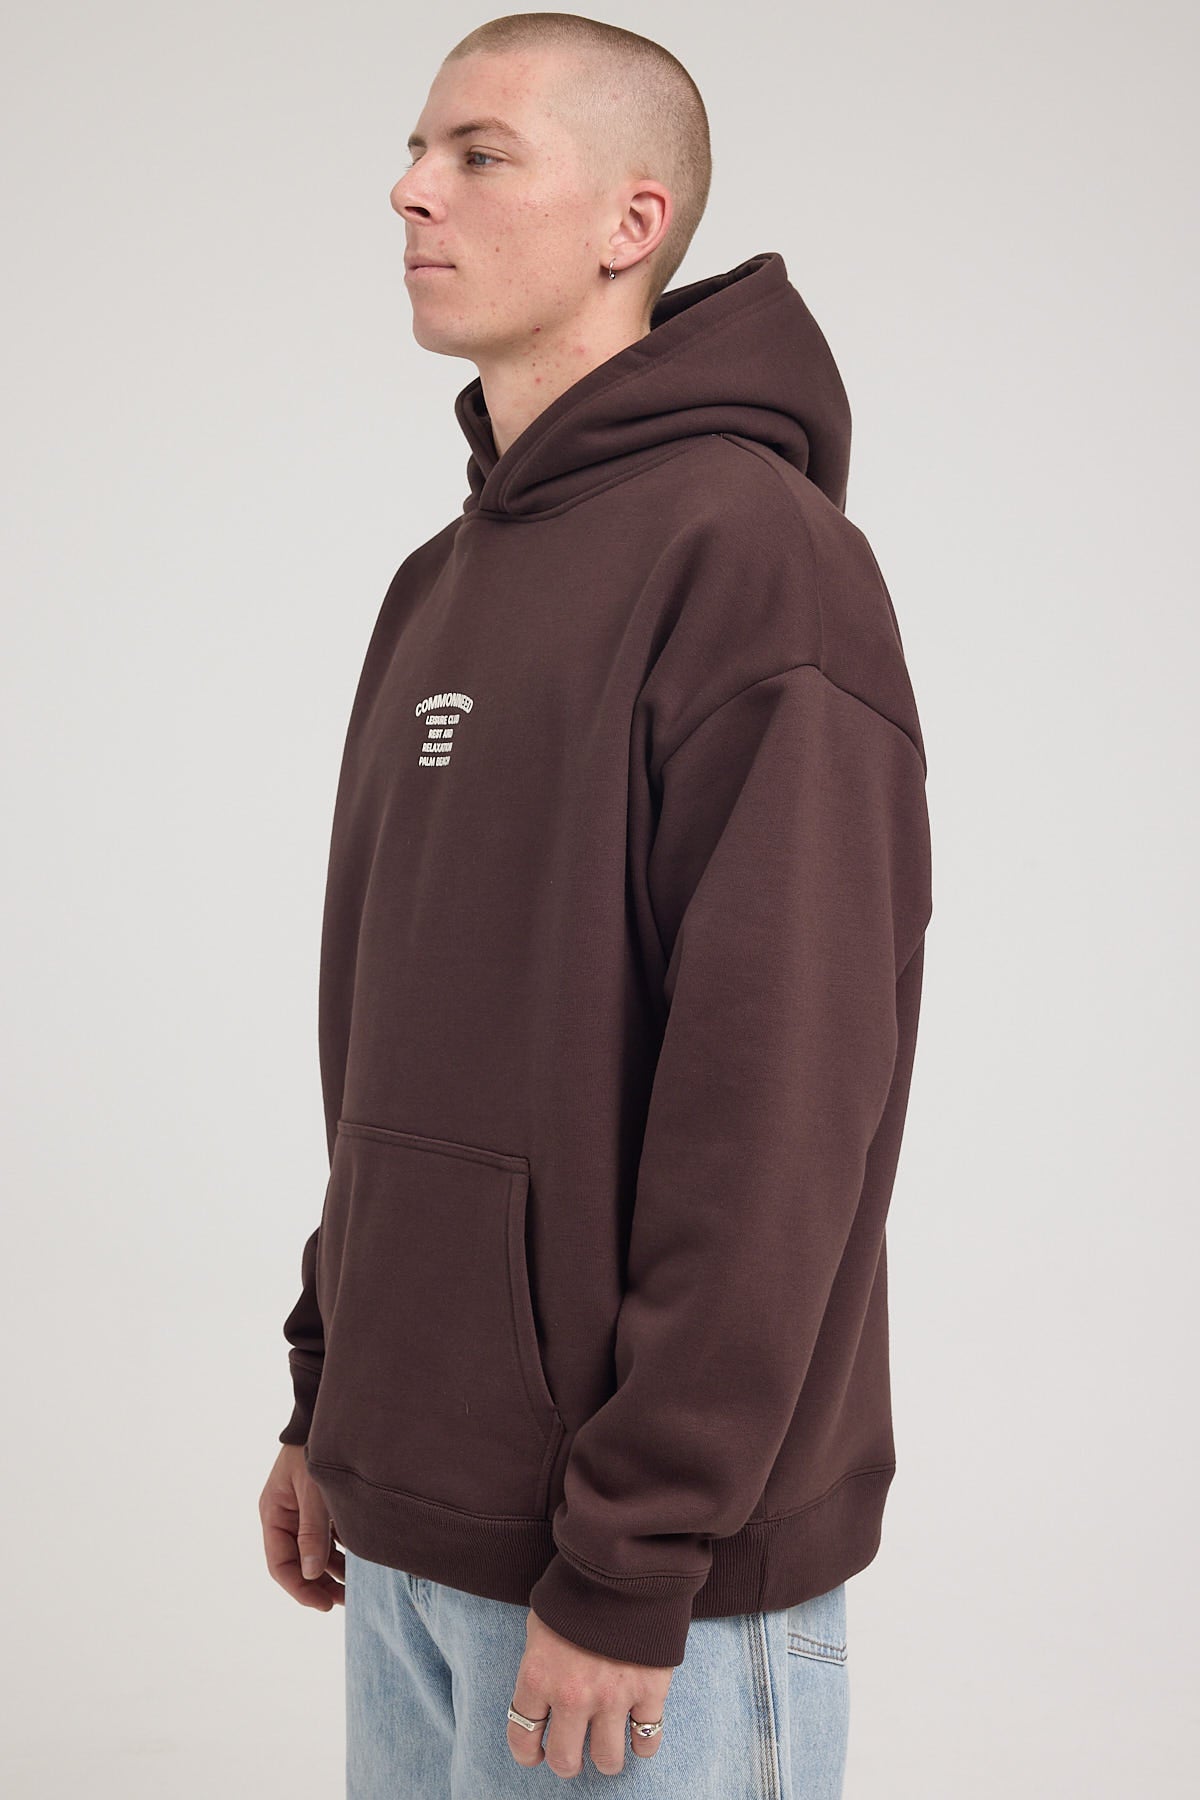 Common Need Relaxation Hoodie Brown